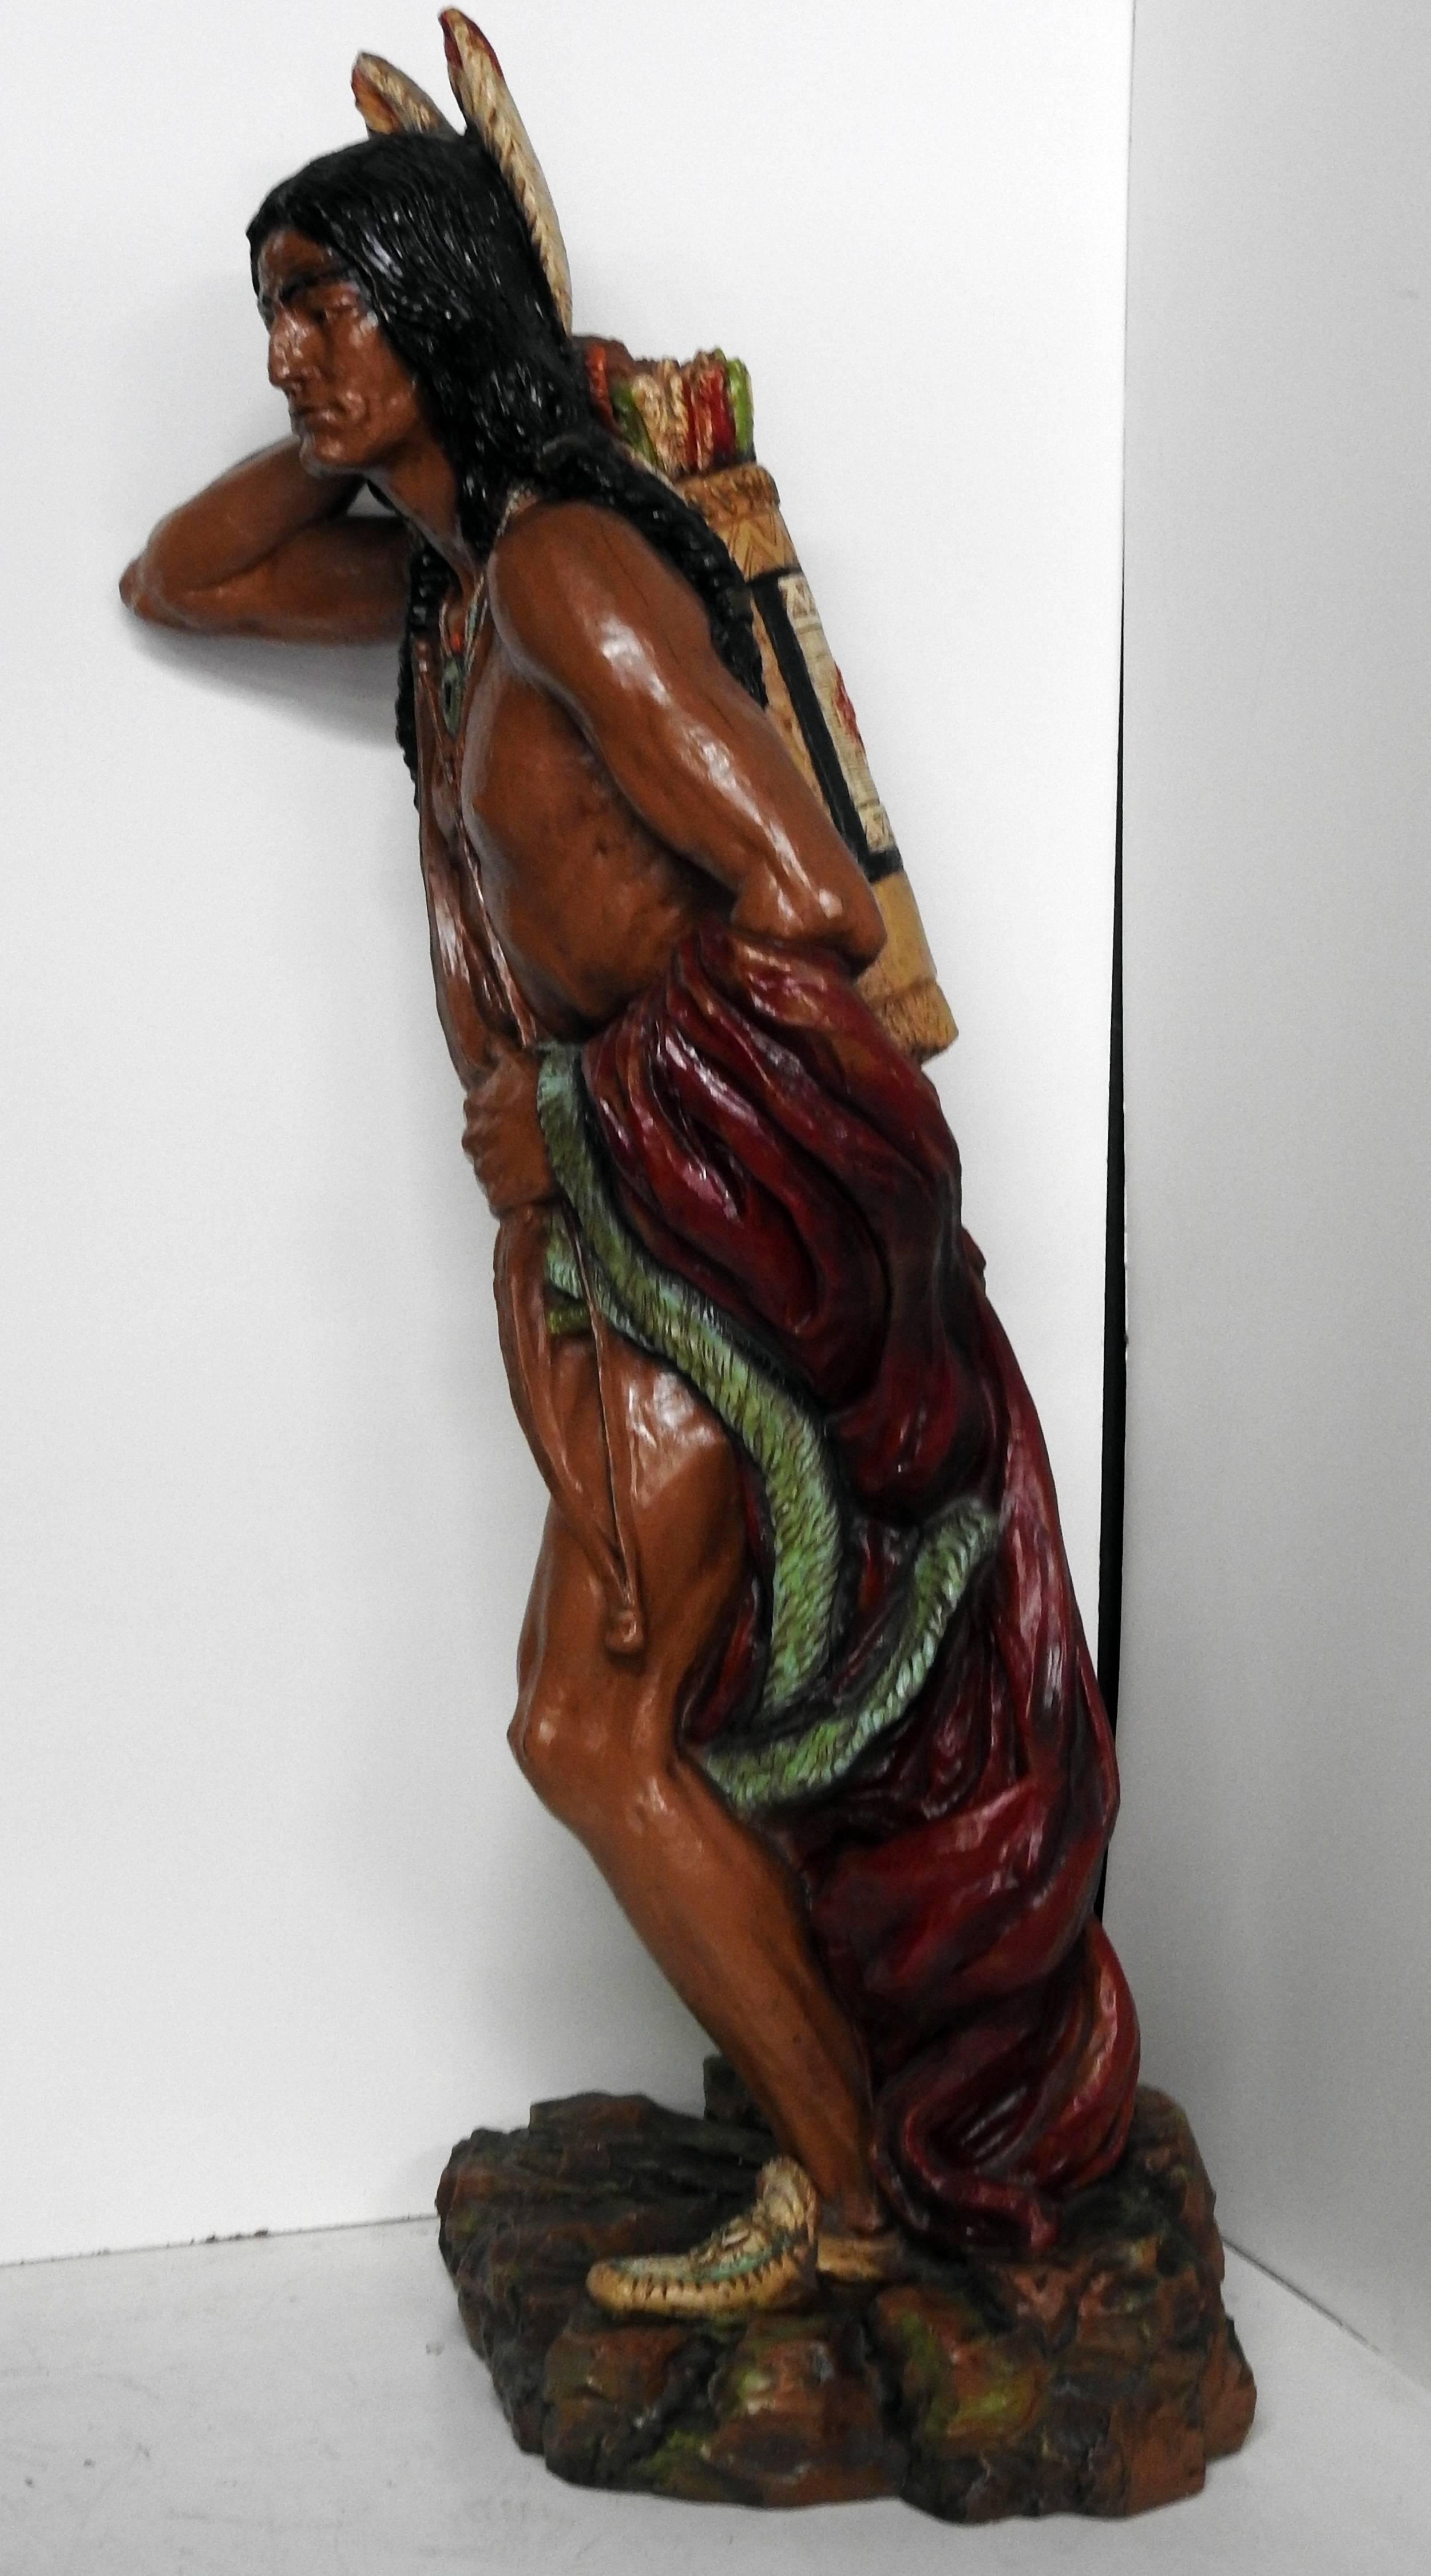 Fiberglass cigar store Indian sculpture with a weighted base.